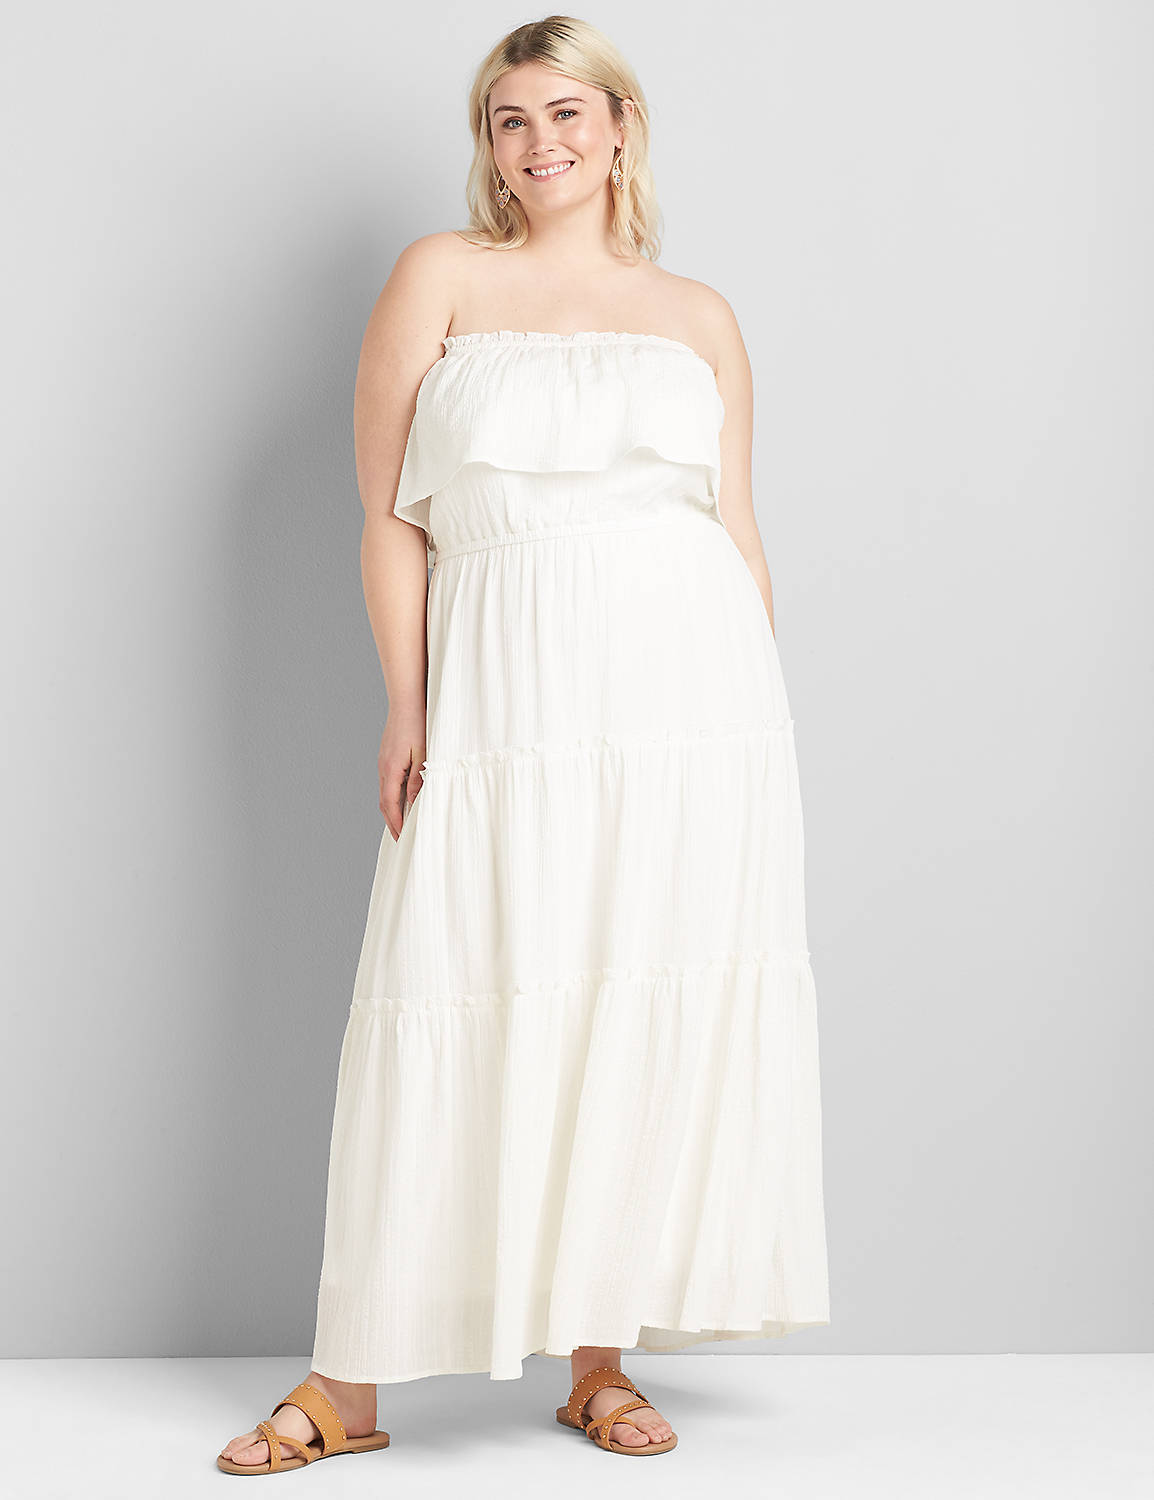 Short Sleeve Off The Shoulder Tiered Maxi 1120640:Ascena White:22/24 PETITE Product Image 5